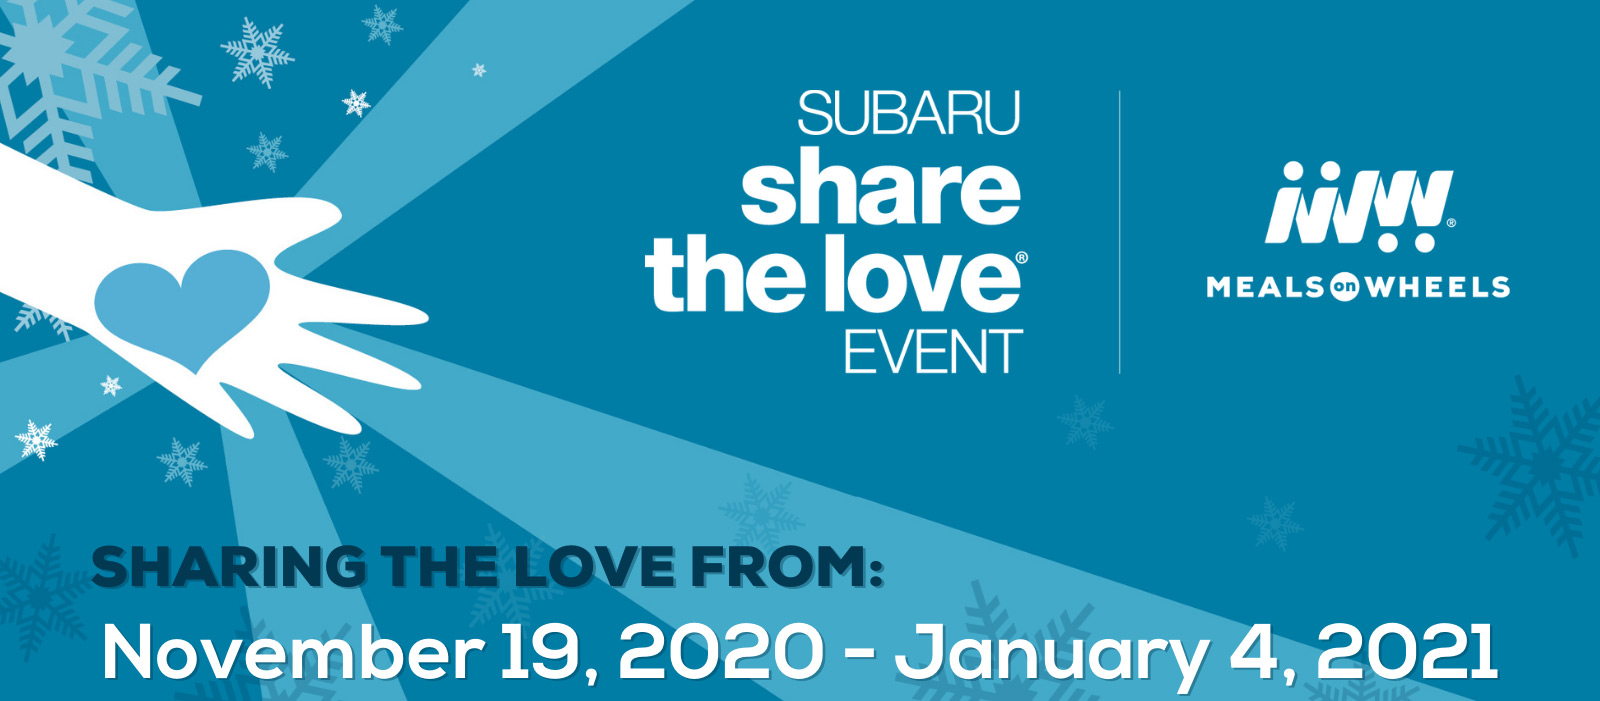 Share the Love with Vulnerable Seniors This Year